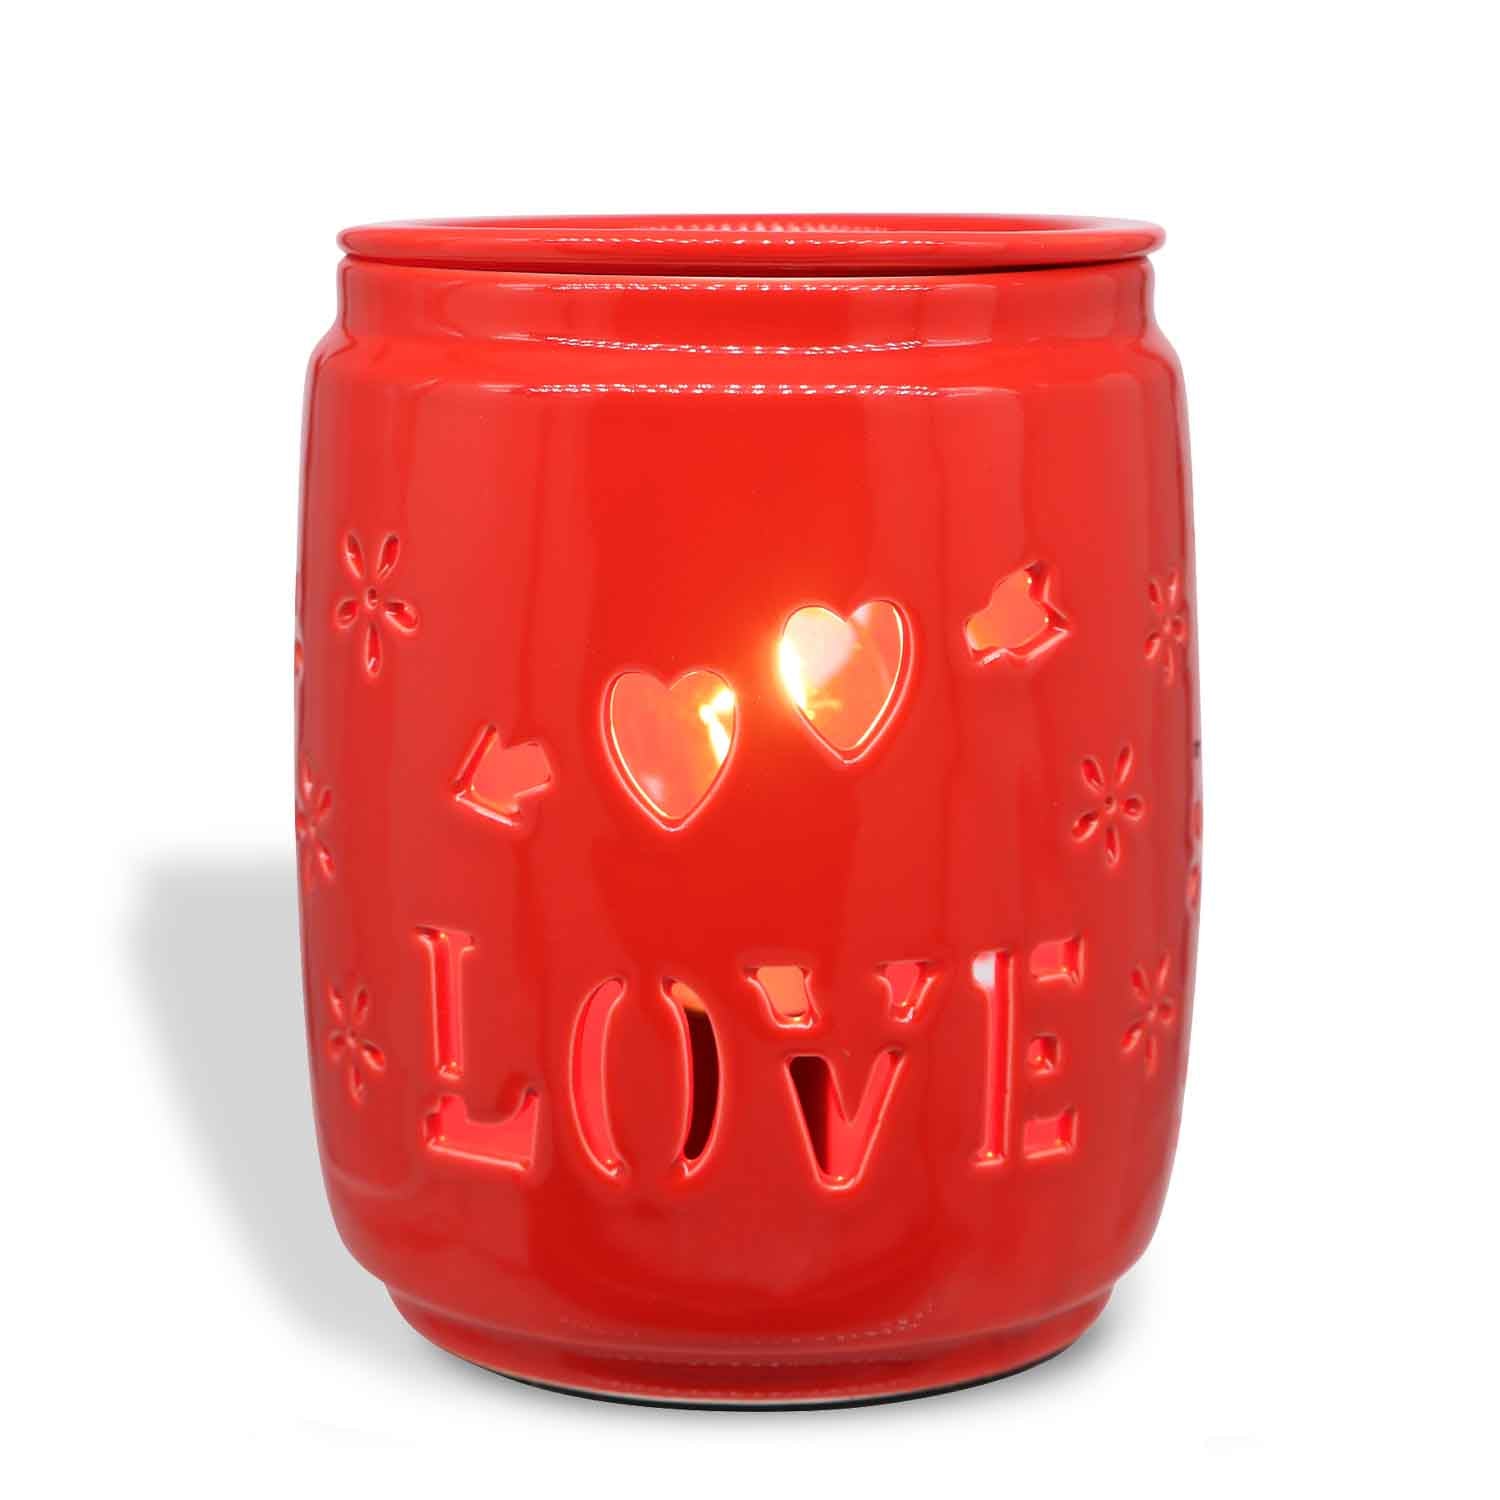 This Tuscany Candle® SEASONAL Love Wax Melt Warmer has the word "love" engraved on it.